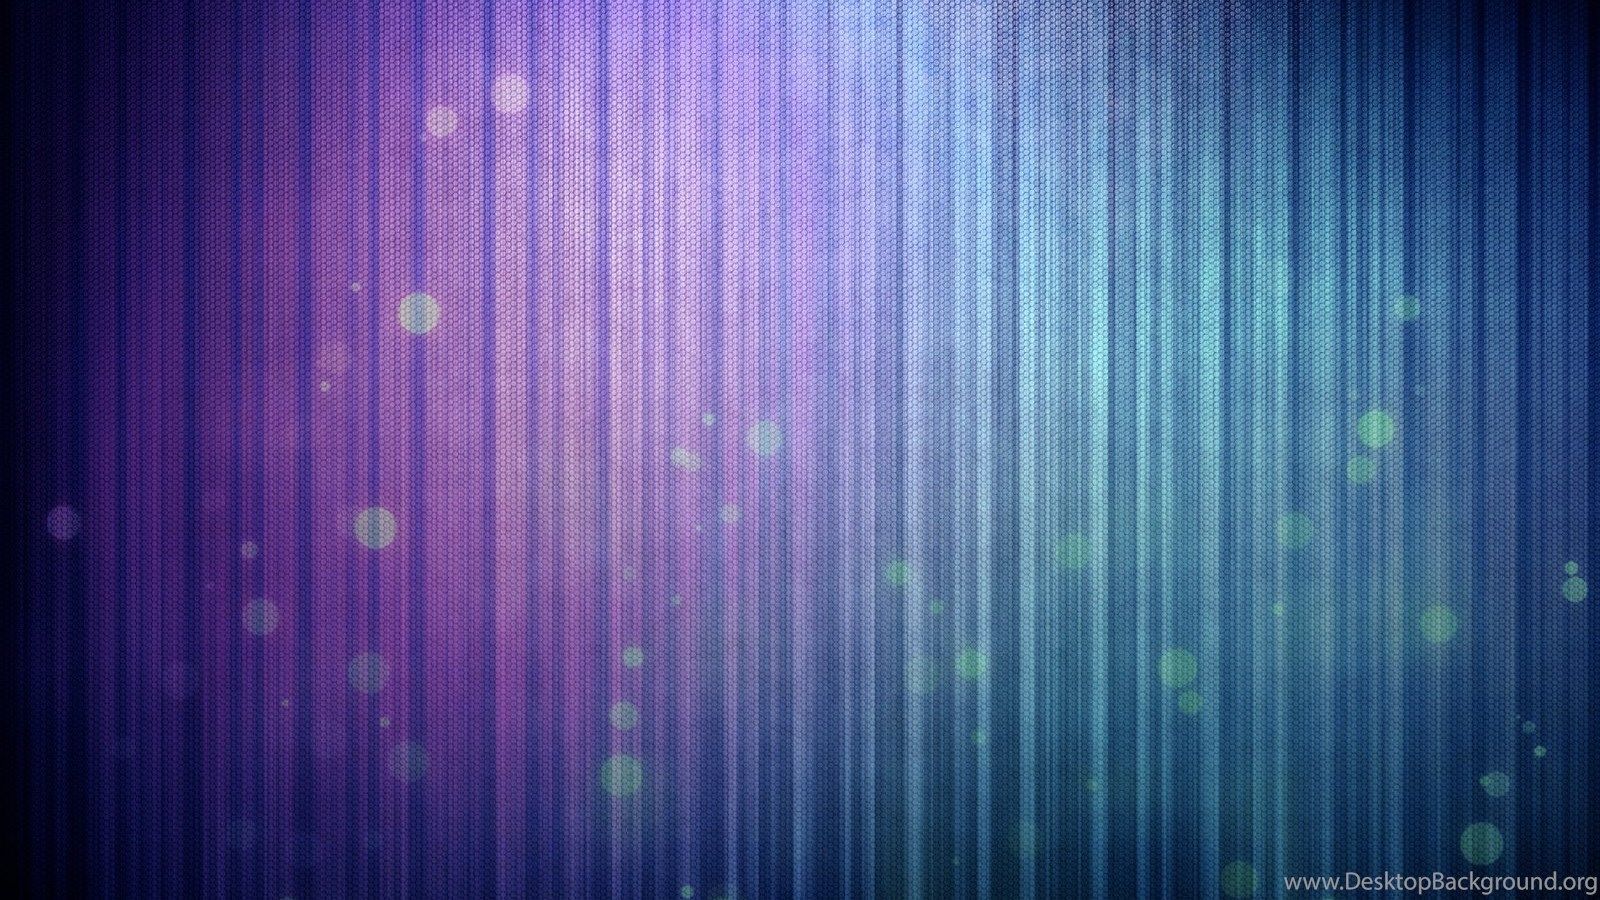 Teal and Purple Abstract Wallpaper Free Teal and Purple Abstract Background